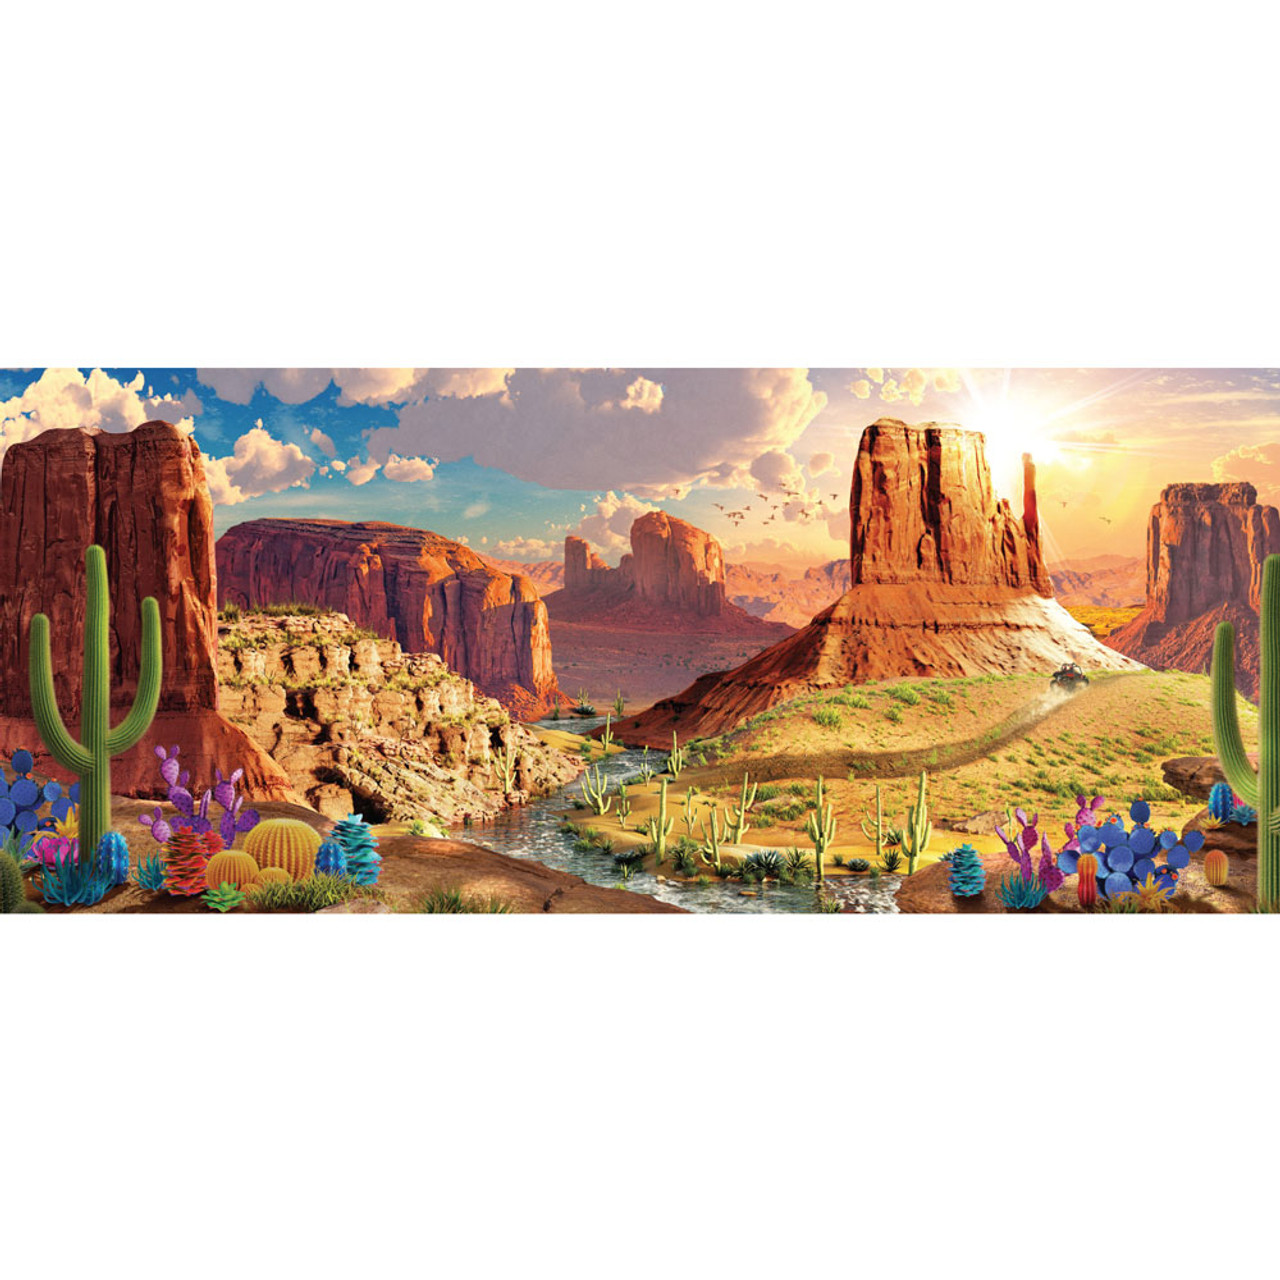 Colorful Canyon Fabric Wall Hanging - Set of 3 panels - 18' x 8 ...